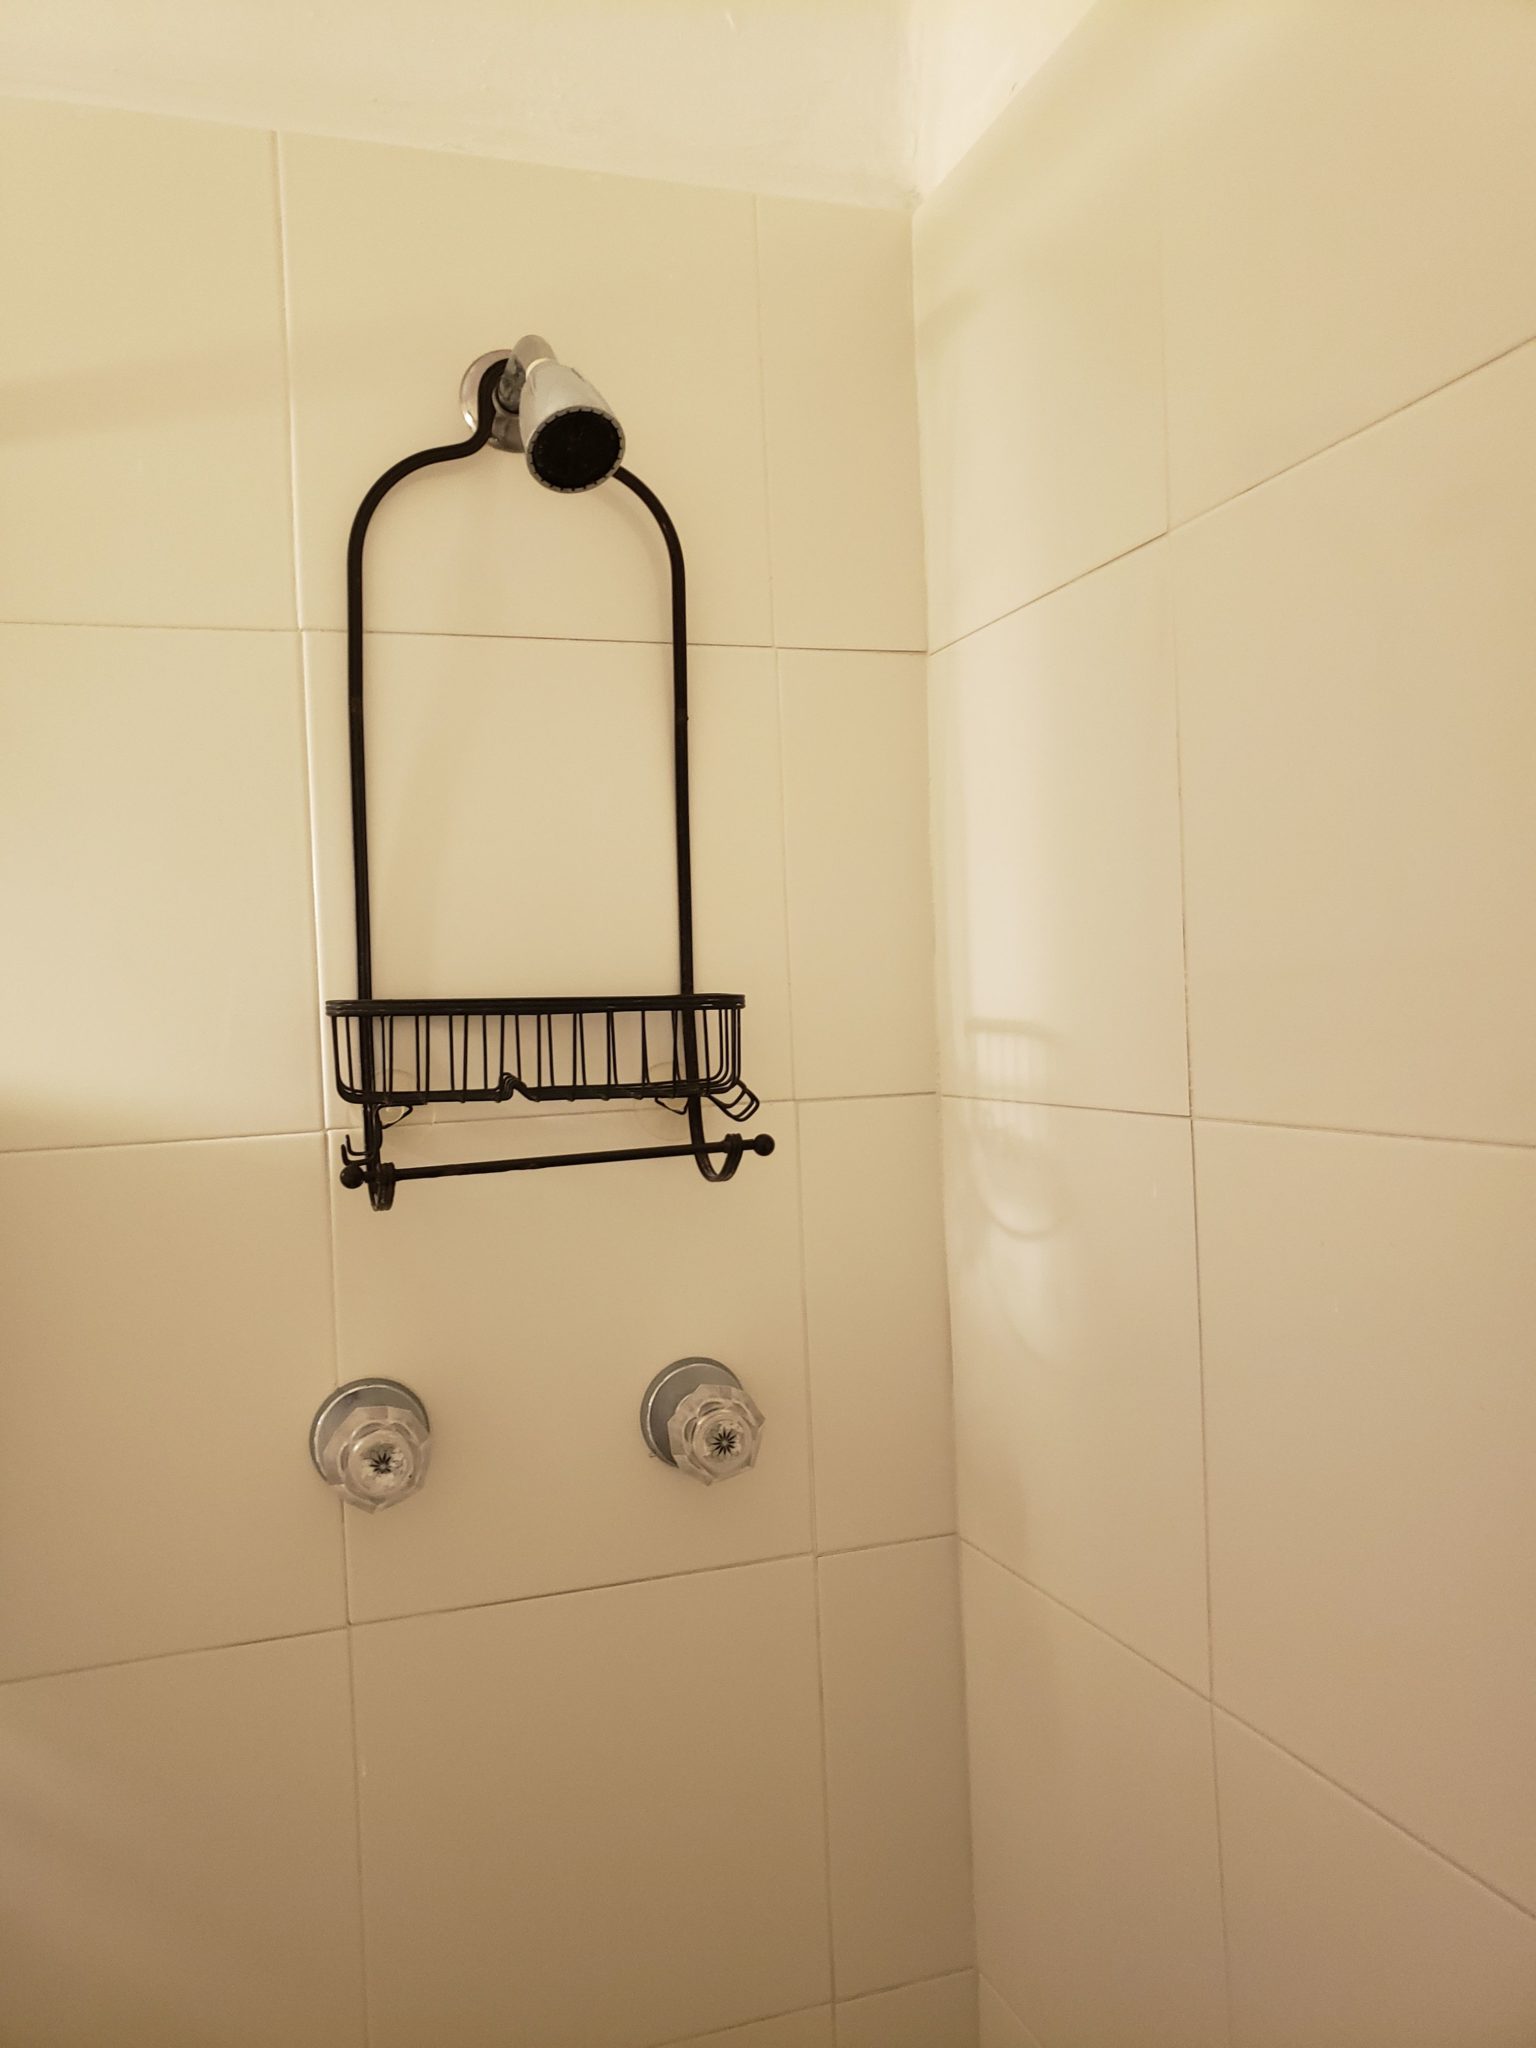 a shower head and shower head on a wall